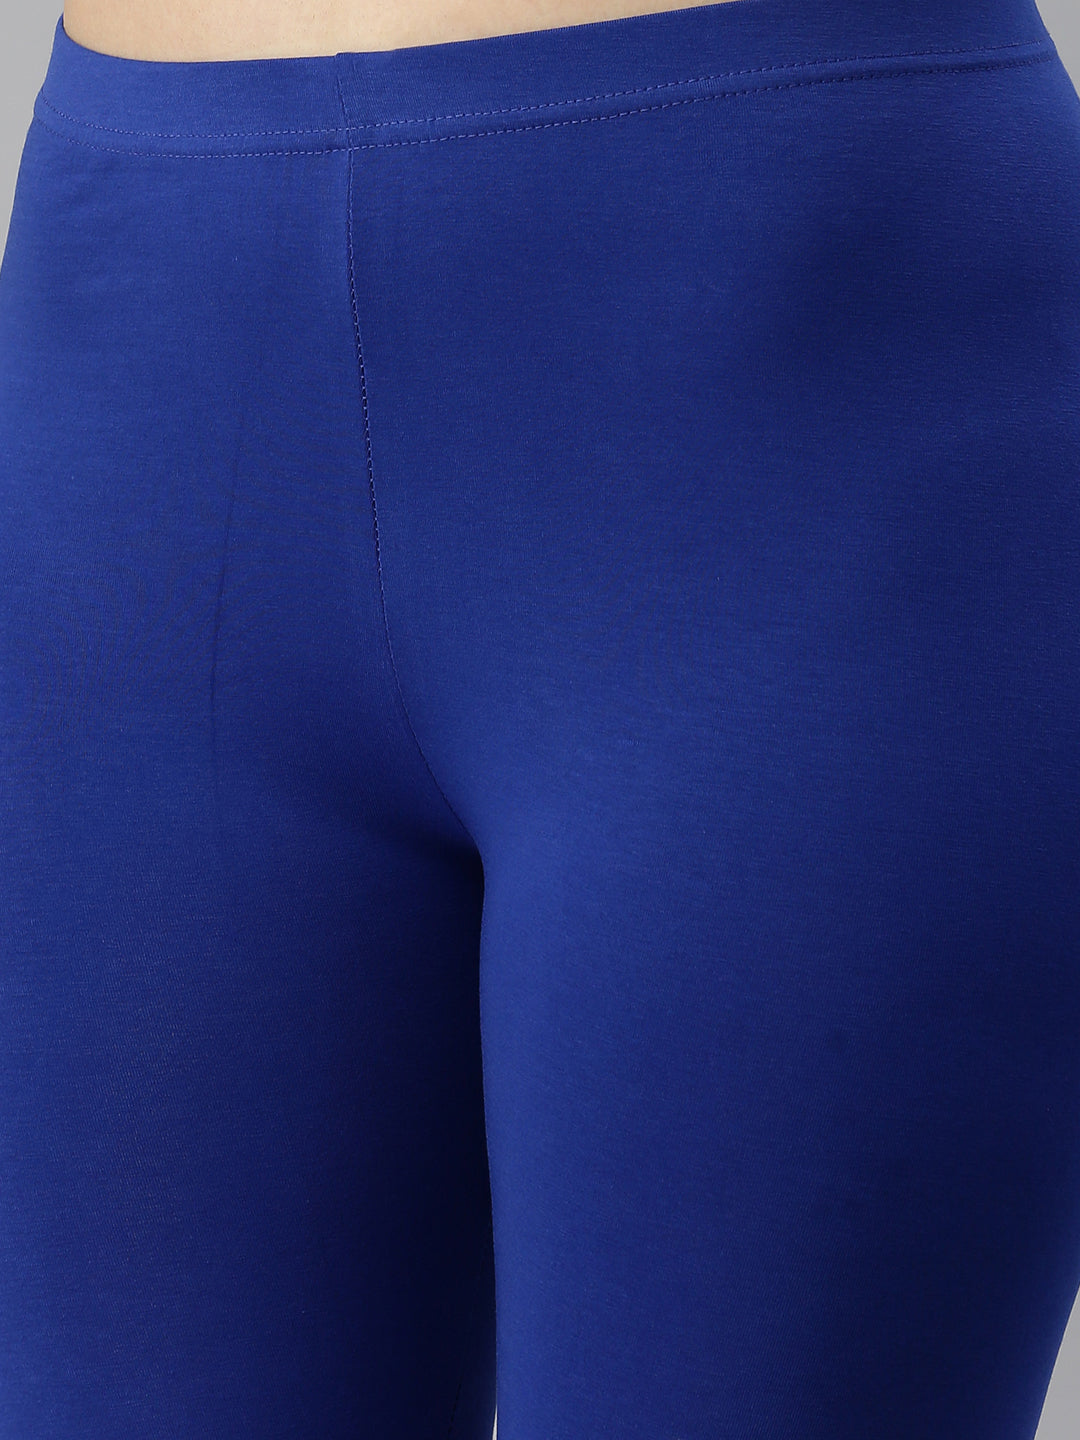 Working On Me Blue Leggings FINAL SALE – Pink Lily